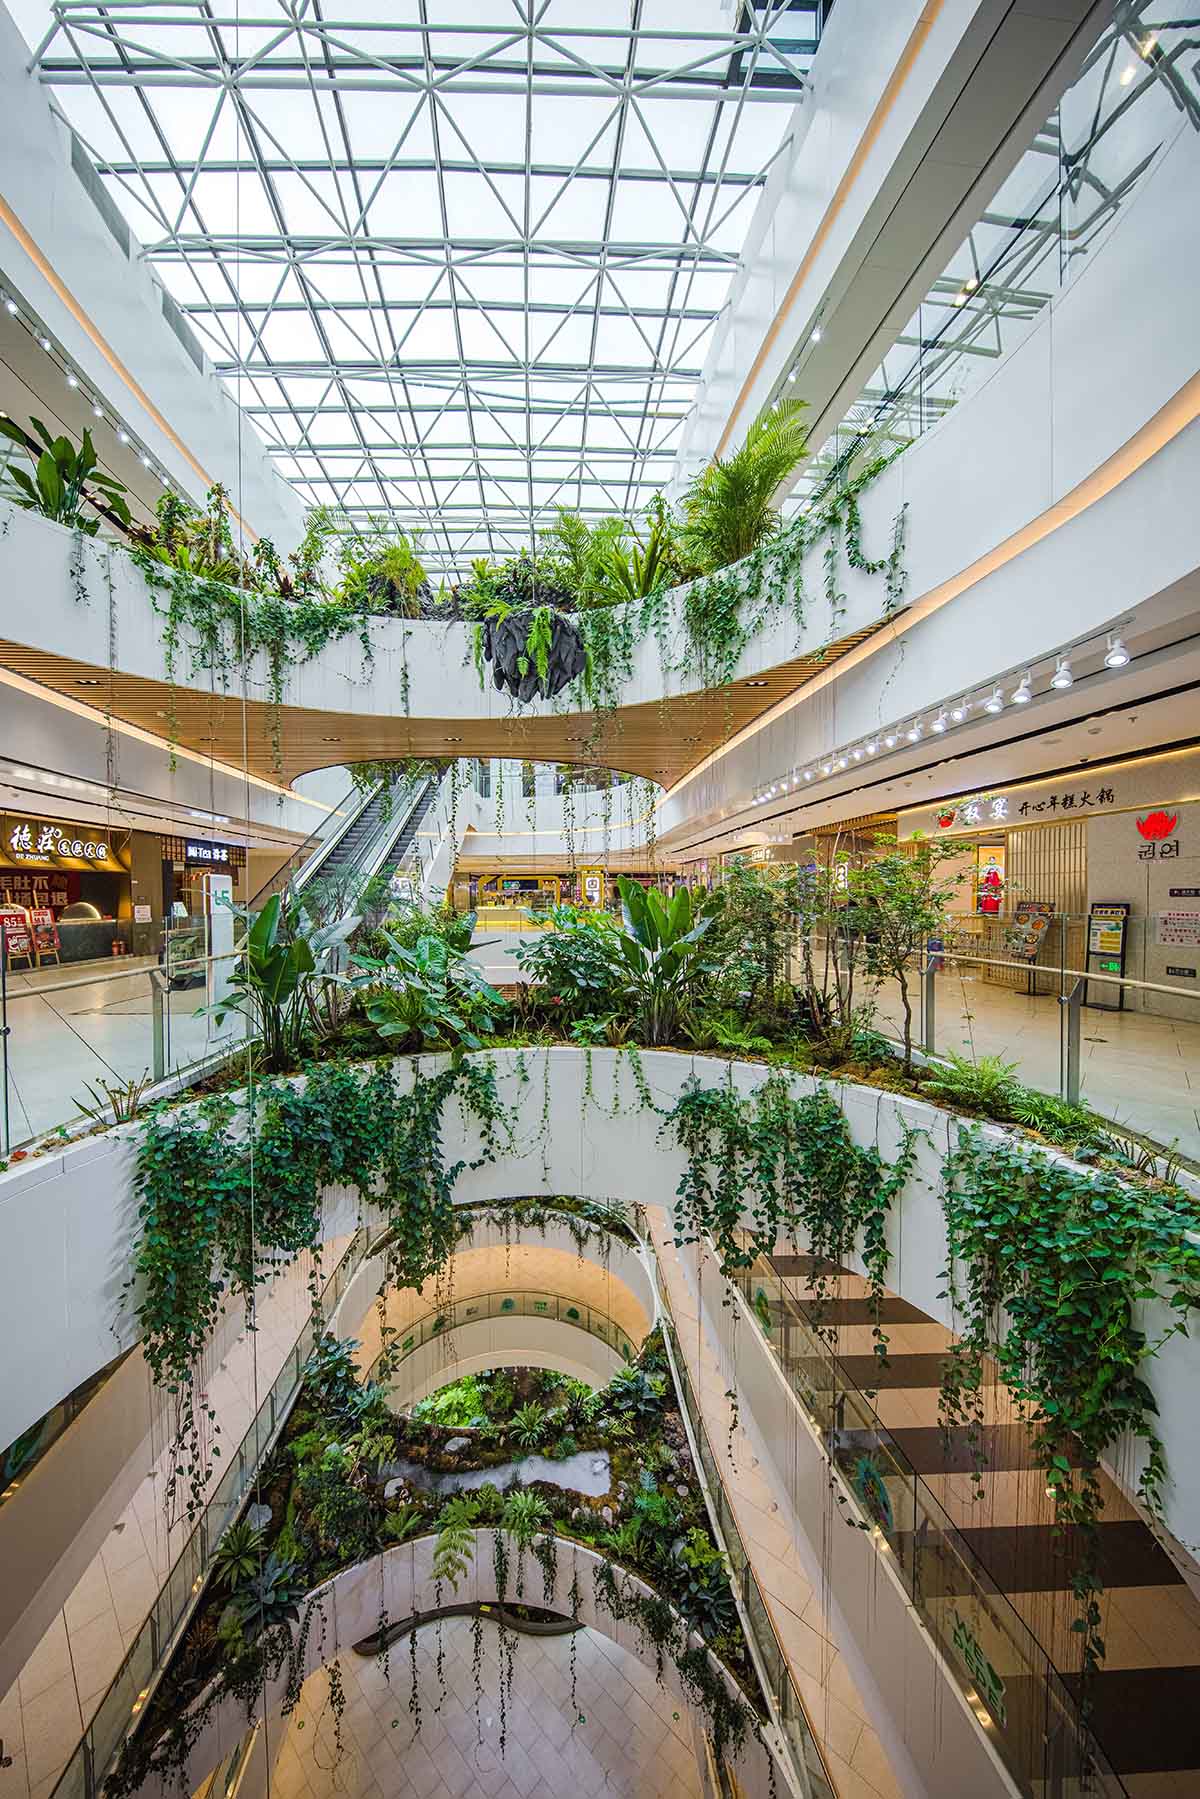 The Gardens Mall is an awesome place to shop or just to visit